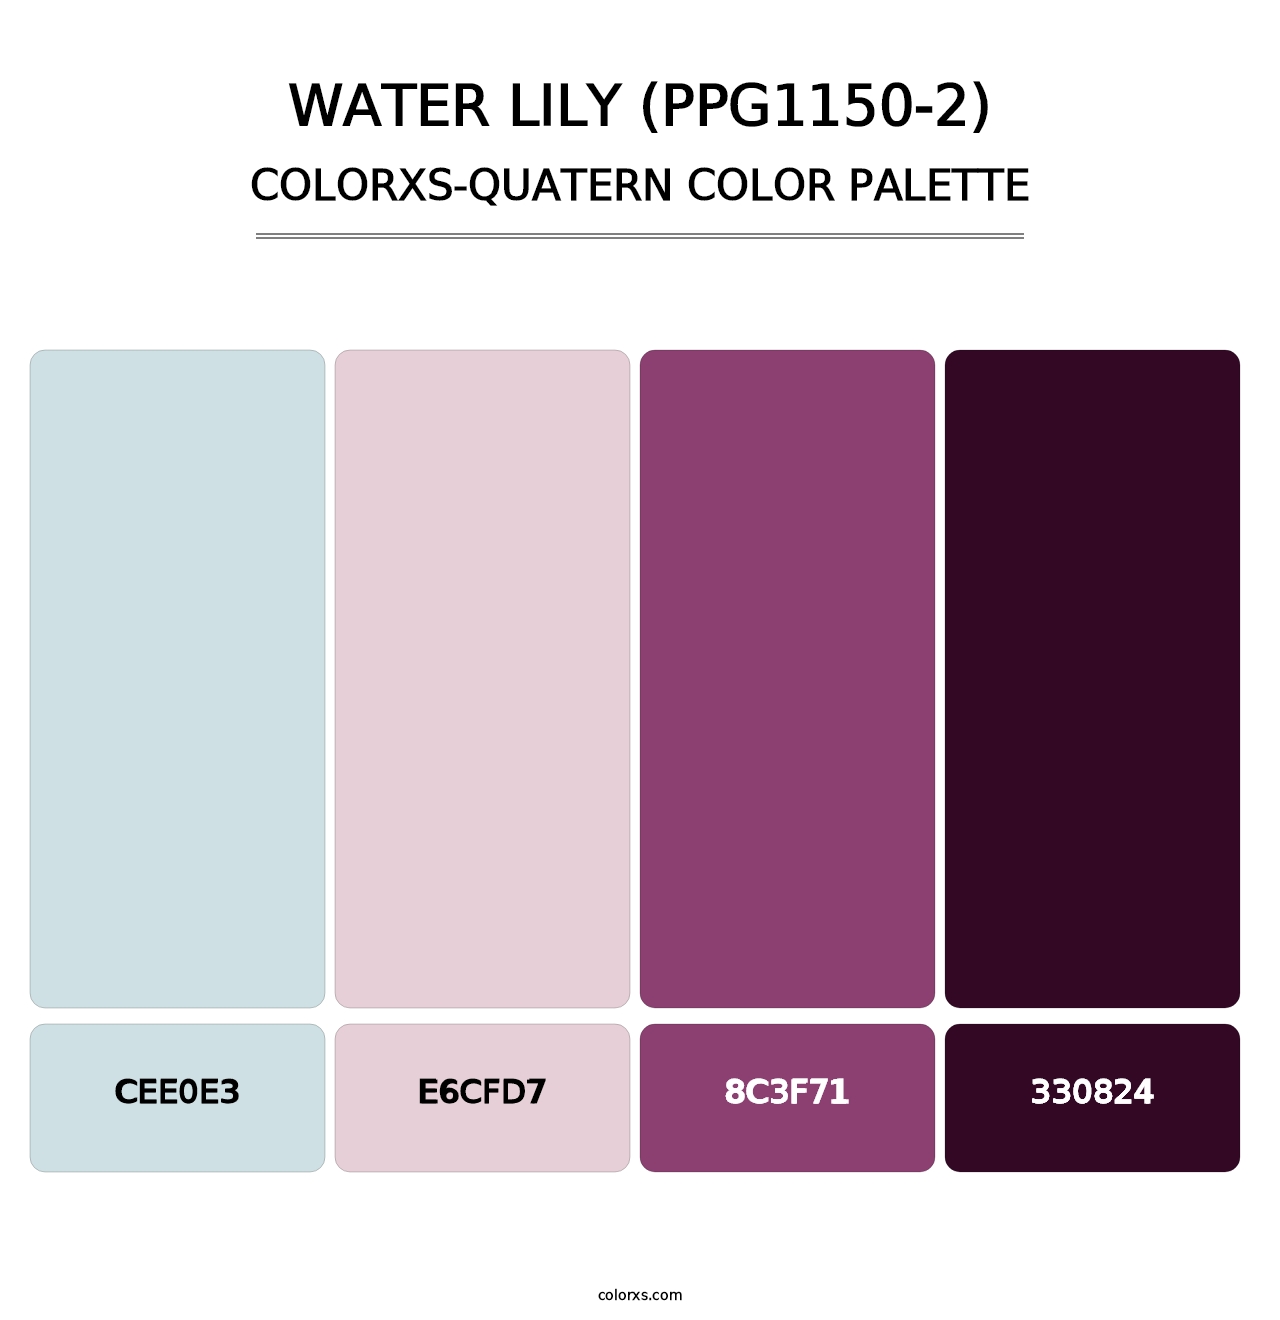 Water Lily (PPG1150-2) - Colorxs Quatern Palette